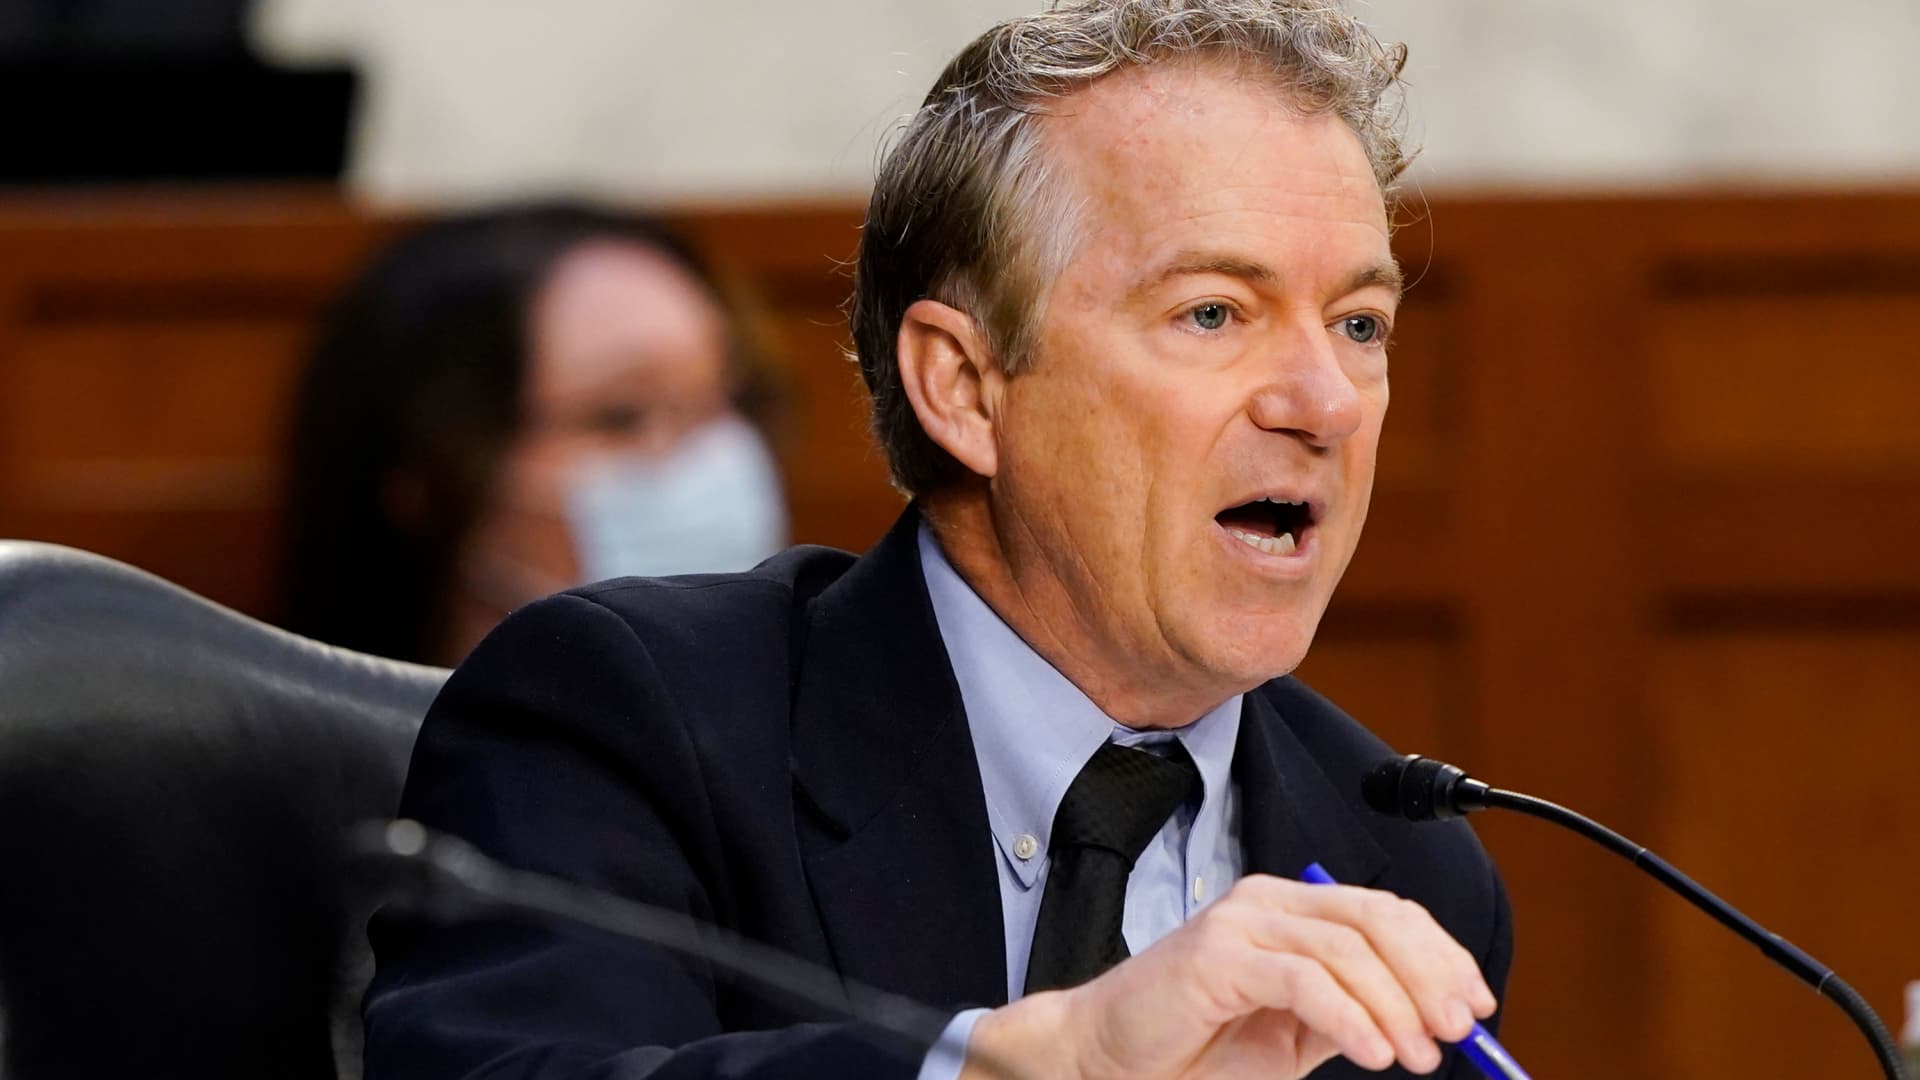 Sen. Rand Paul (R-KY) speaks during a Senate Health, Education, Labor and Pensions Committee hearing on the federal coronavirus response on Capitol Hill on March 18, 2021 in Washington, DC.